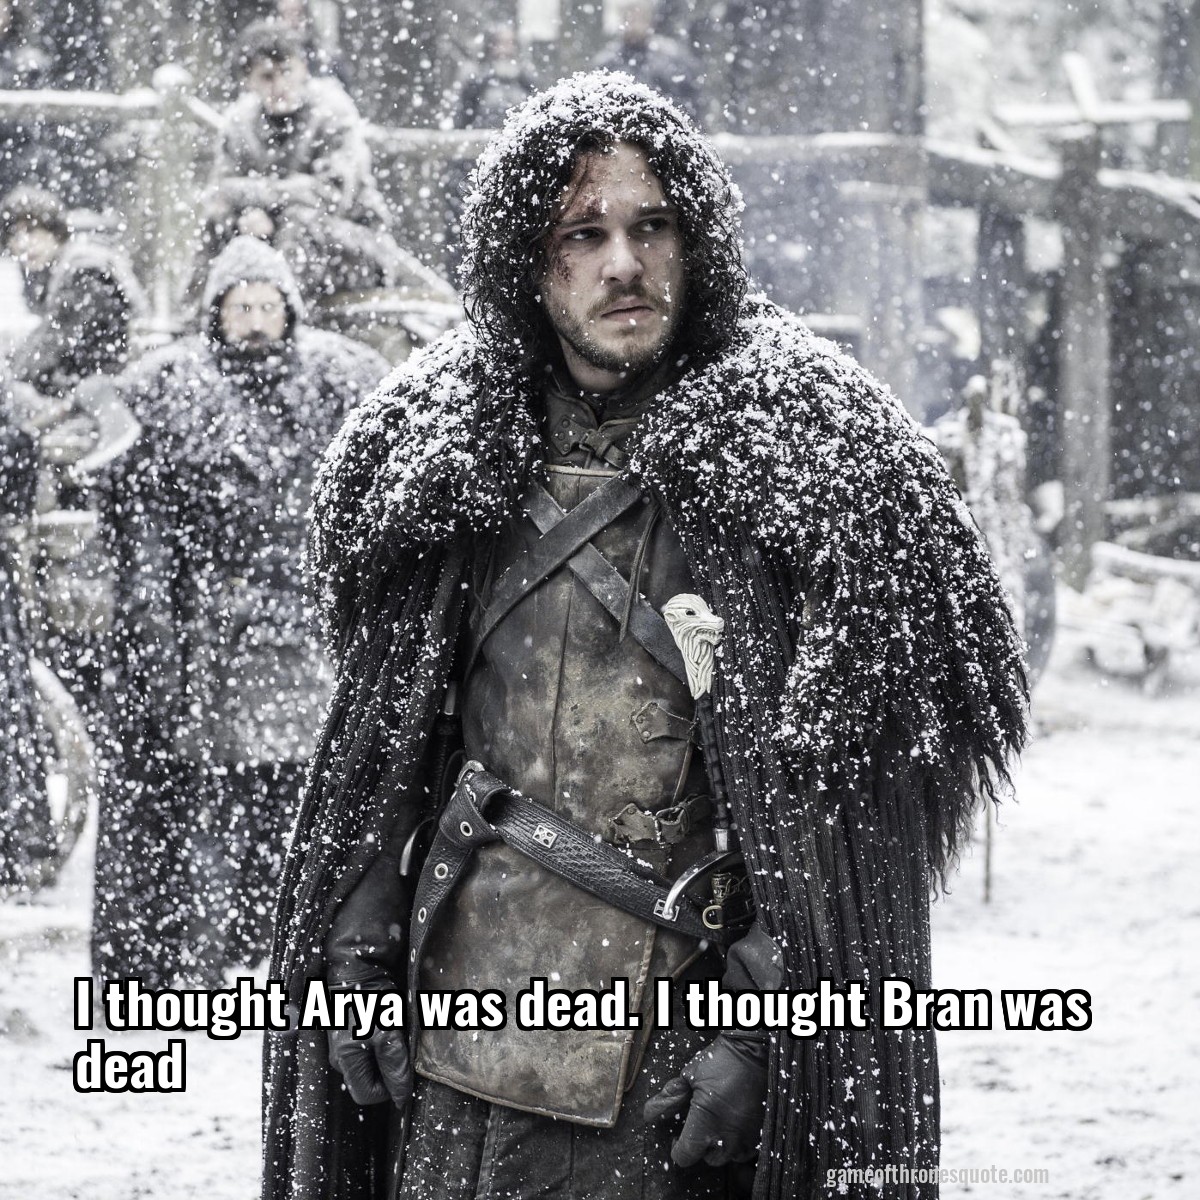 I thought Arya was dead. I thought Bran was dead